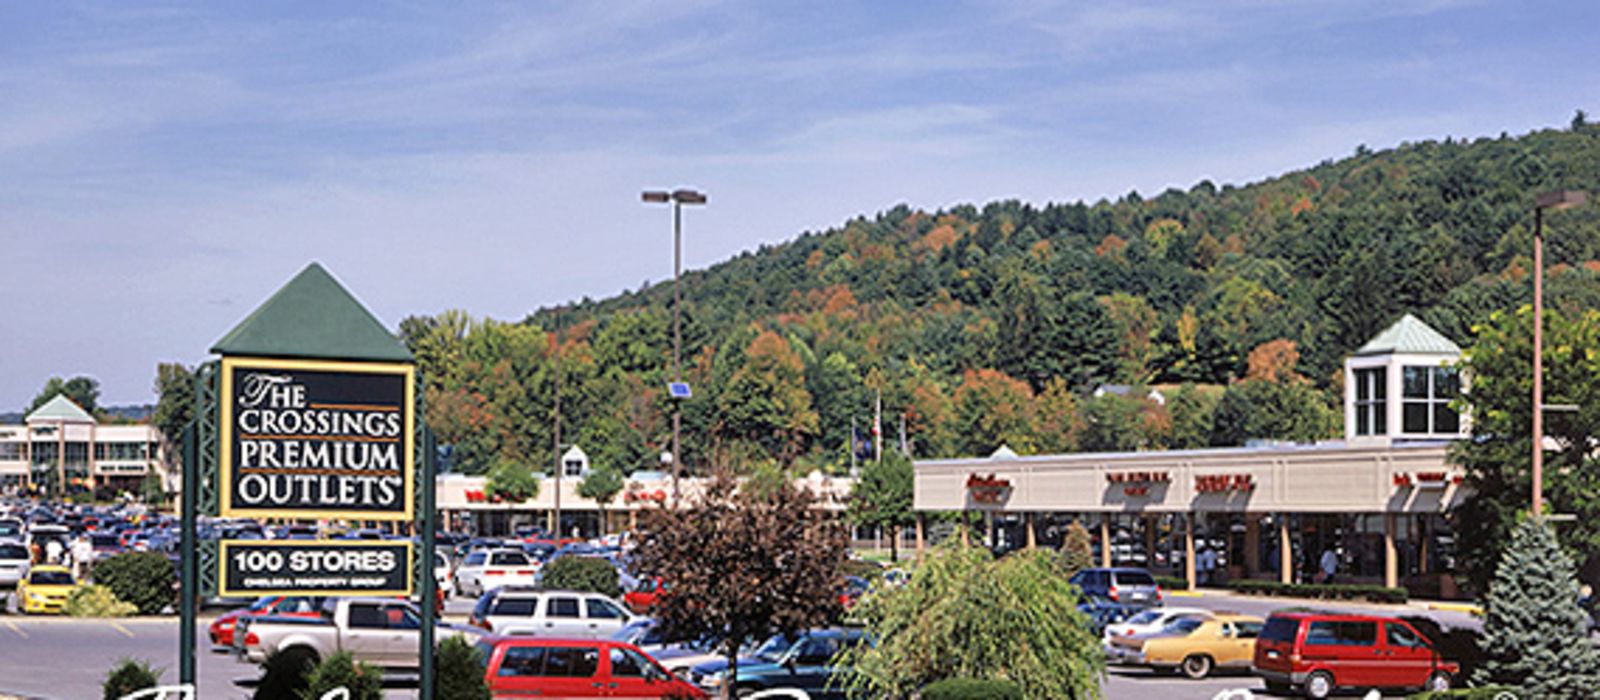 The Crossings Outlet